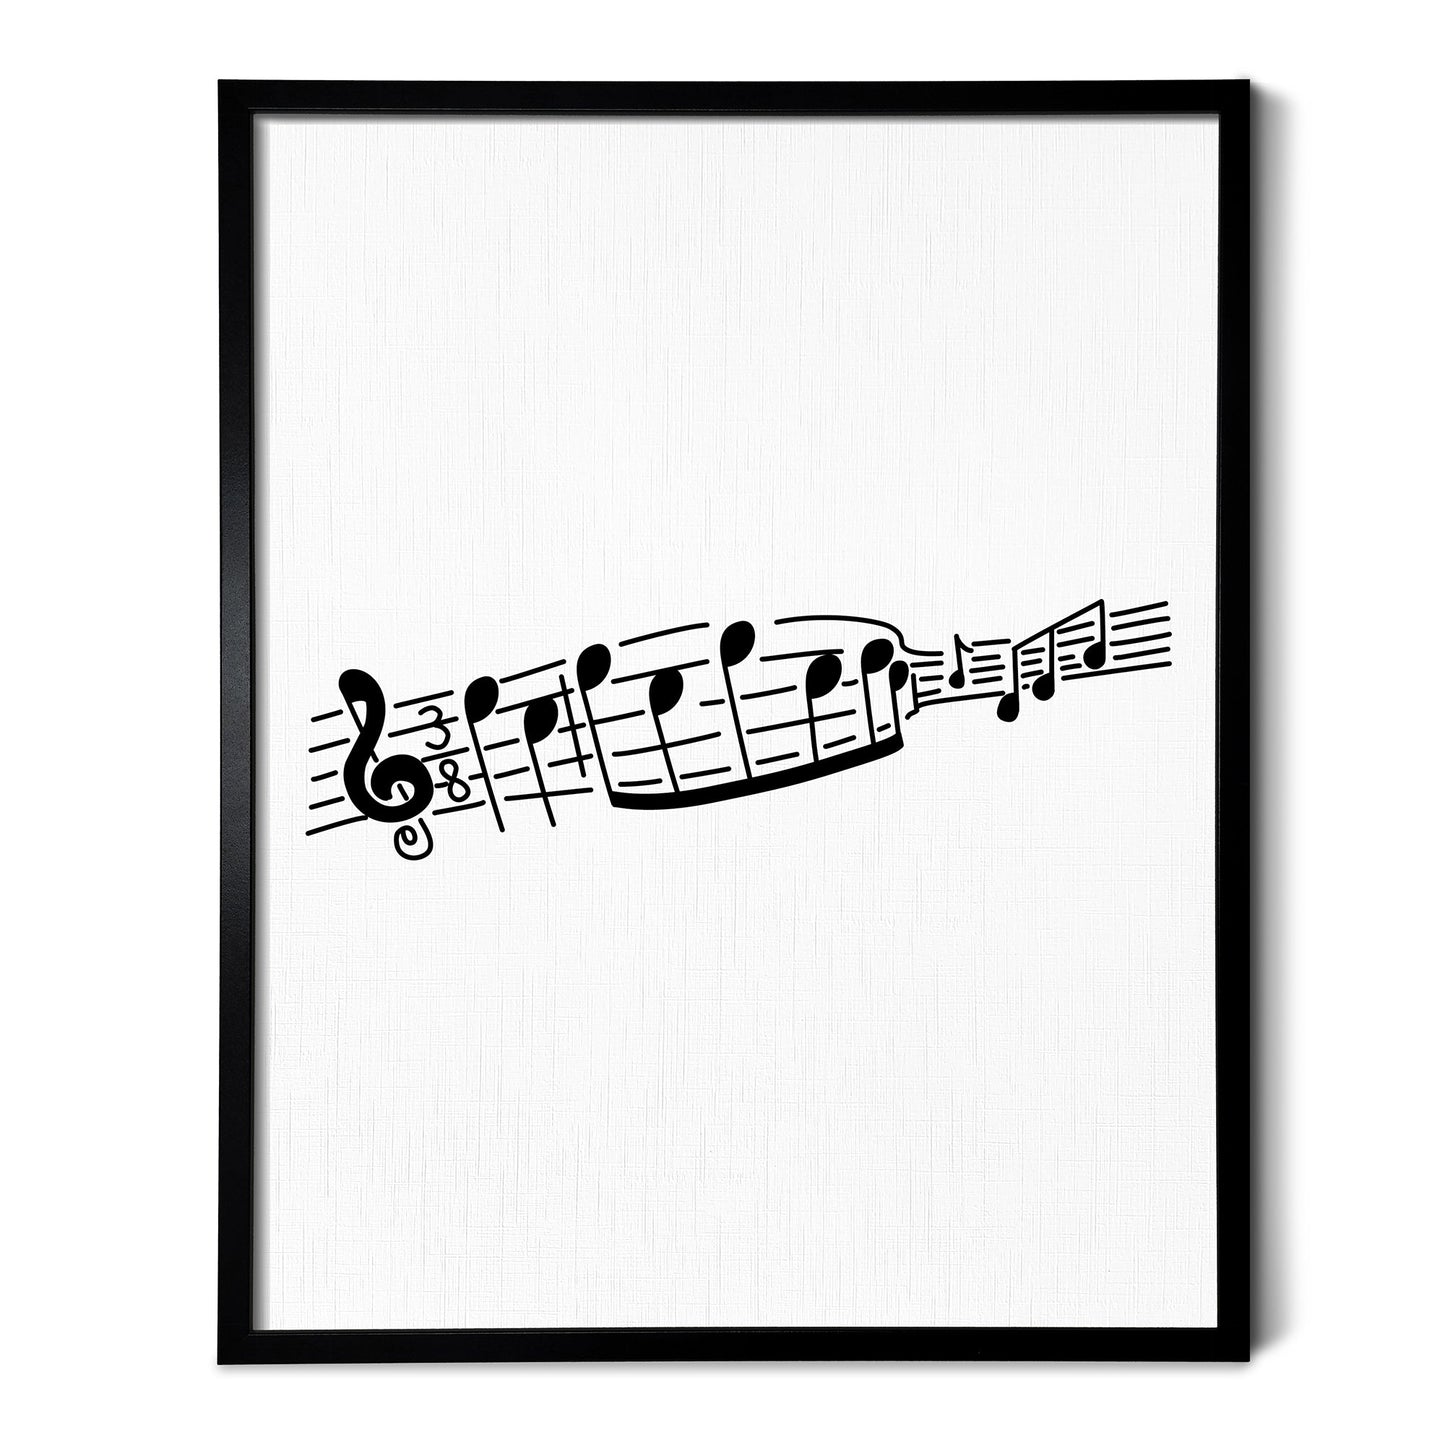 A line art drawing of Music Notes on white linen paper in a thin black picture frame